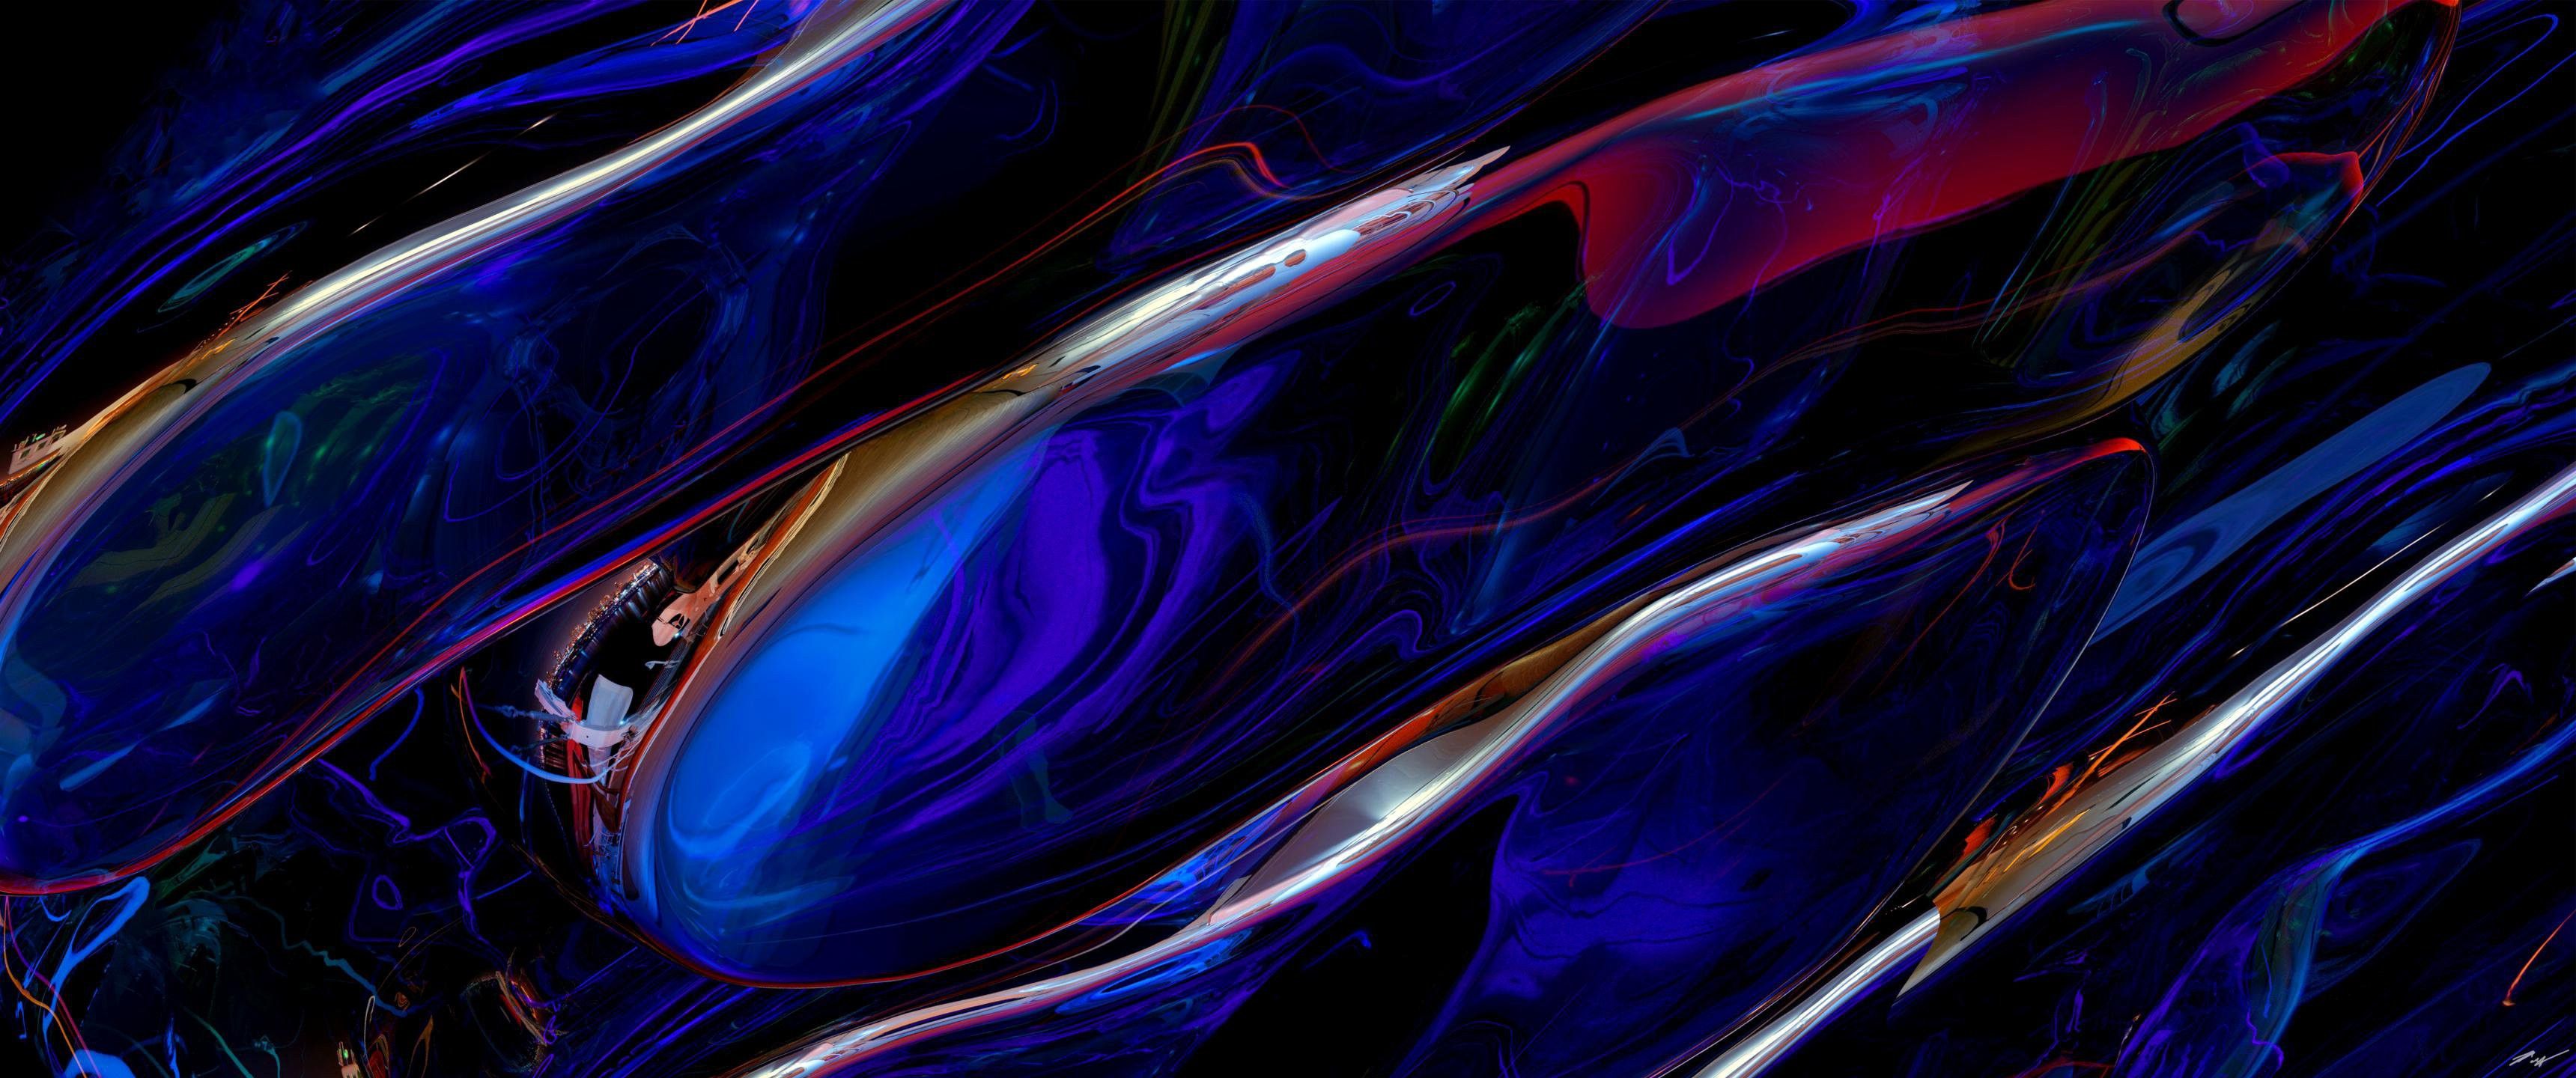 A blue and red fractal abstract piece with flowing lines. - 3440x1440